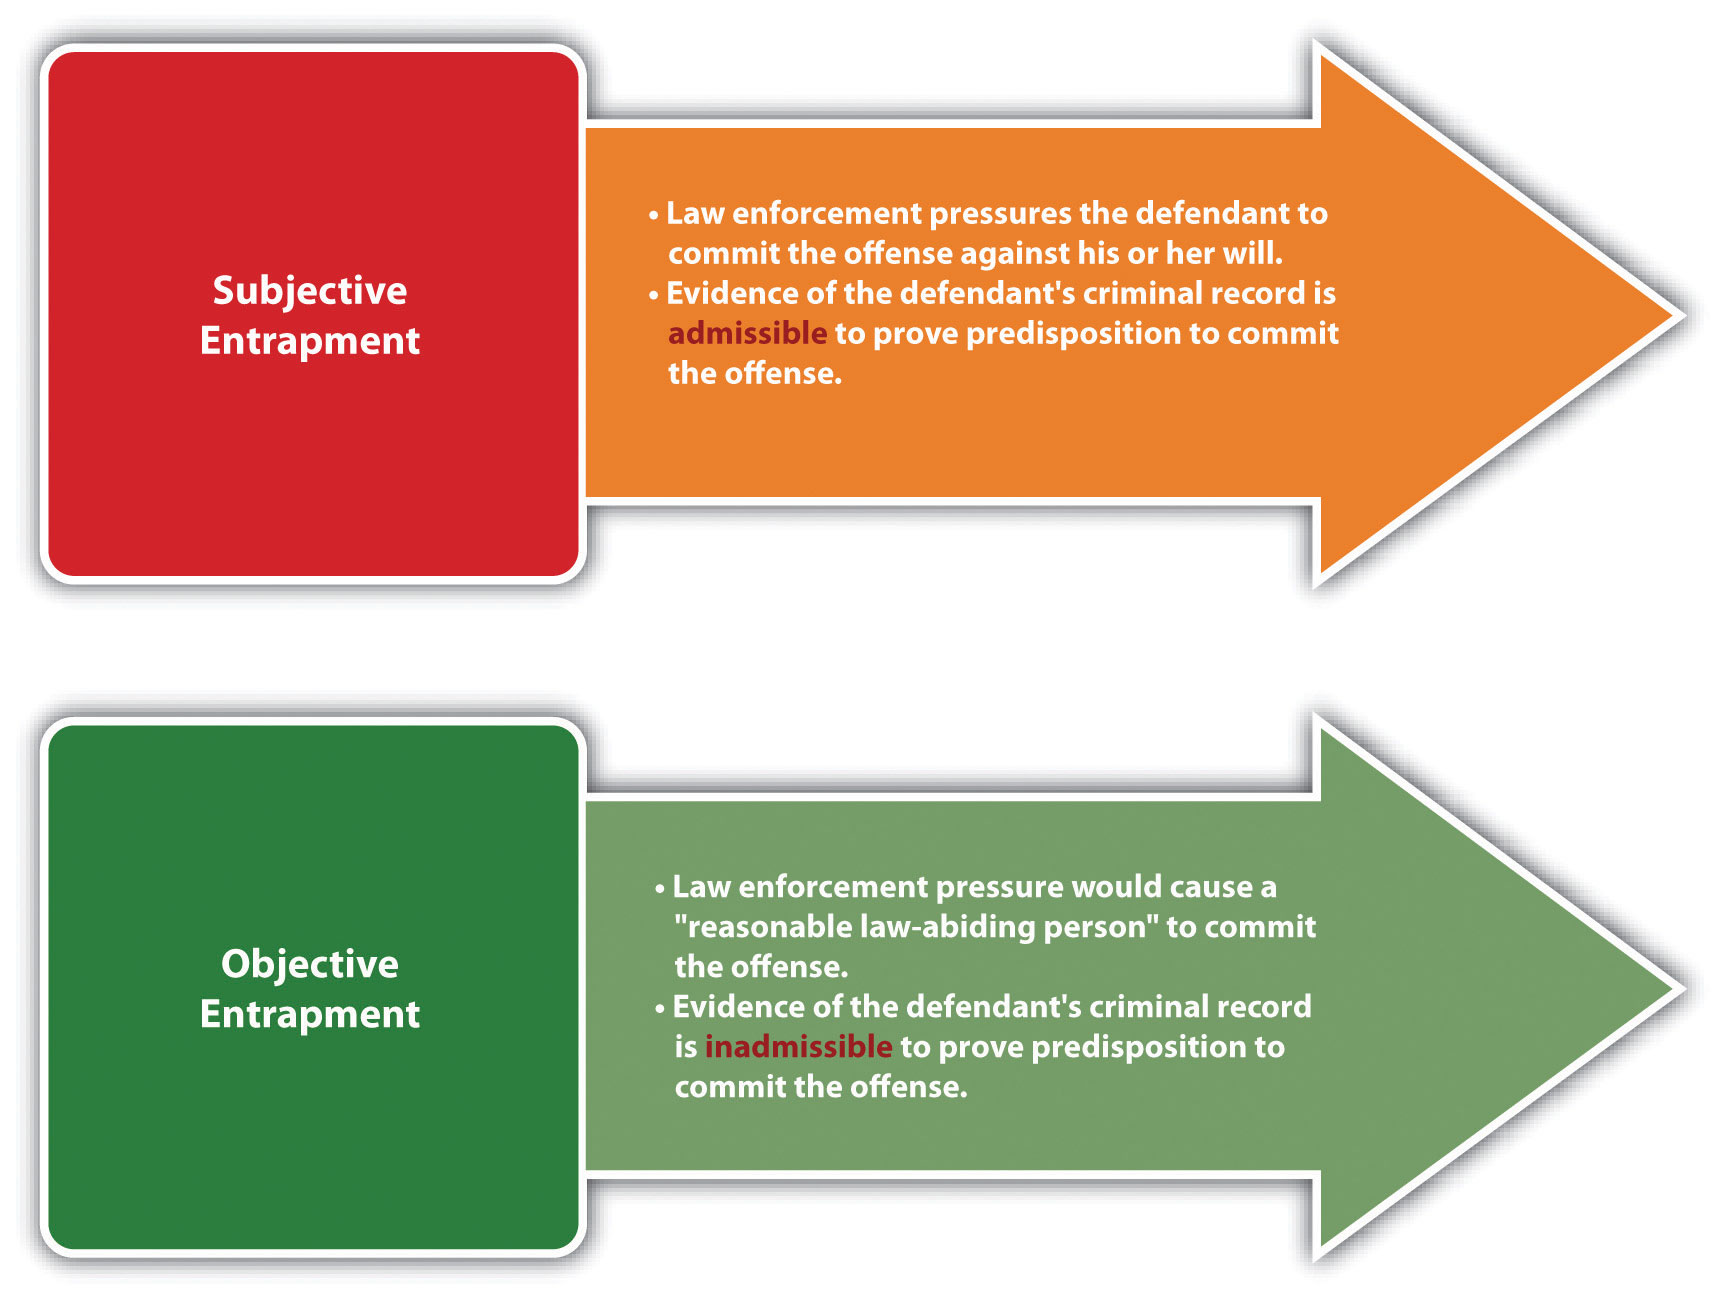 Diagram comparing subjective and objective entrapment